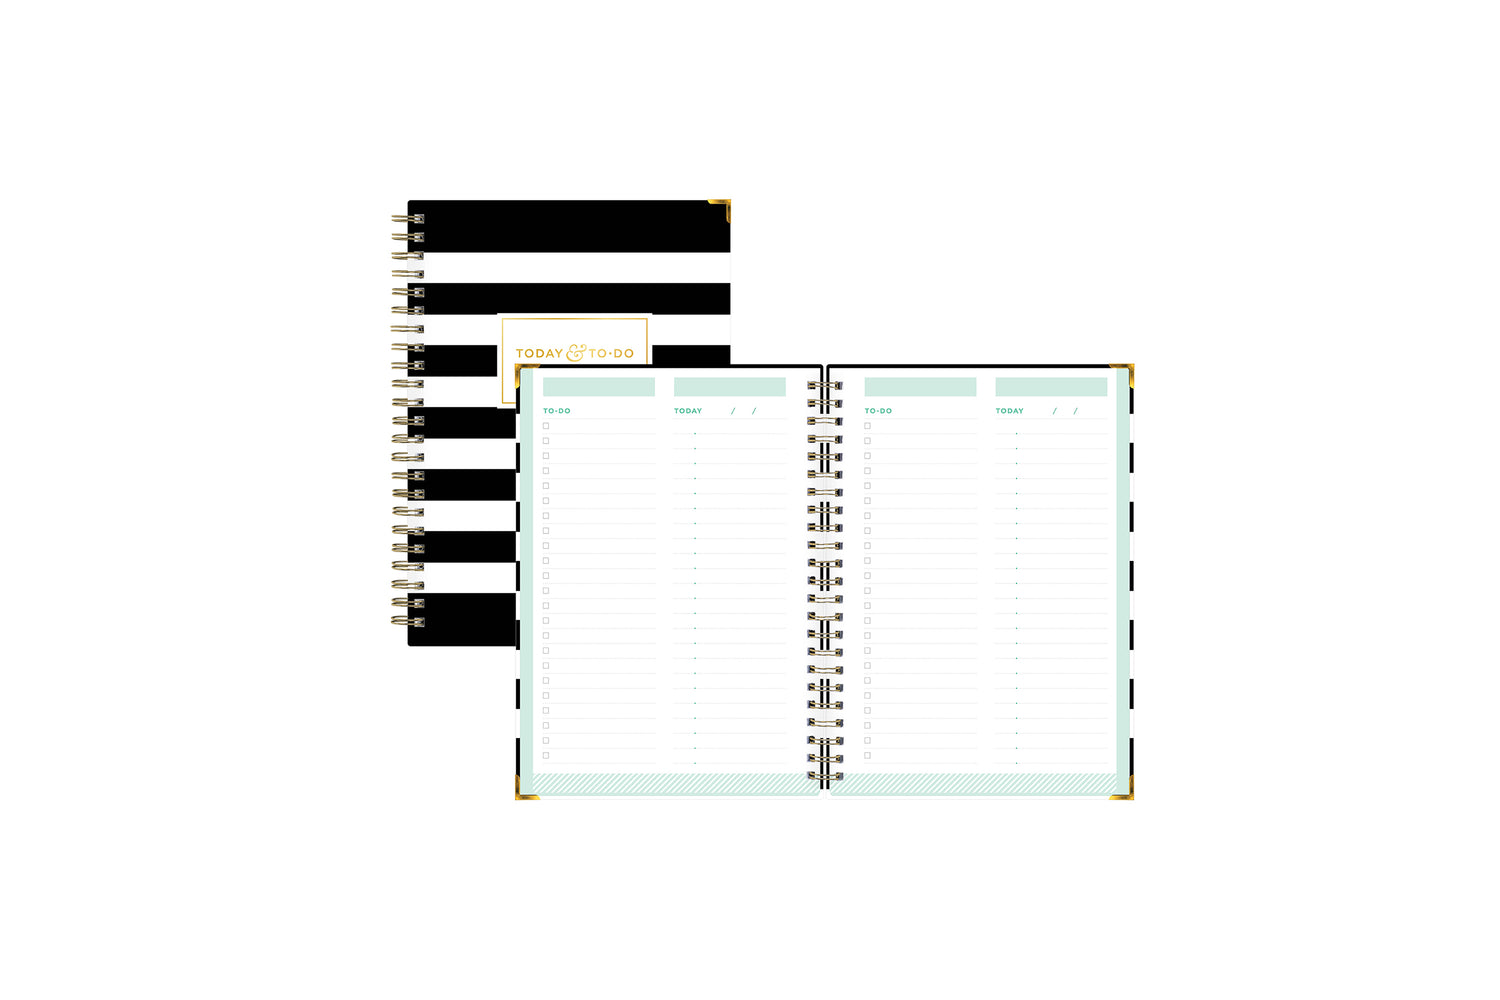 This Day designer for blue sky today and to-do notebook features an interior layout with To Do list, check boxes, ample writing spice, bullet points, and section for putting subject and dates on a mint border and white background